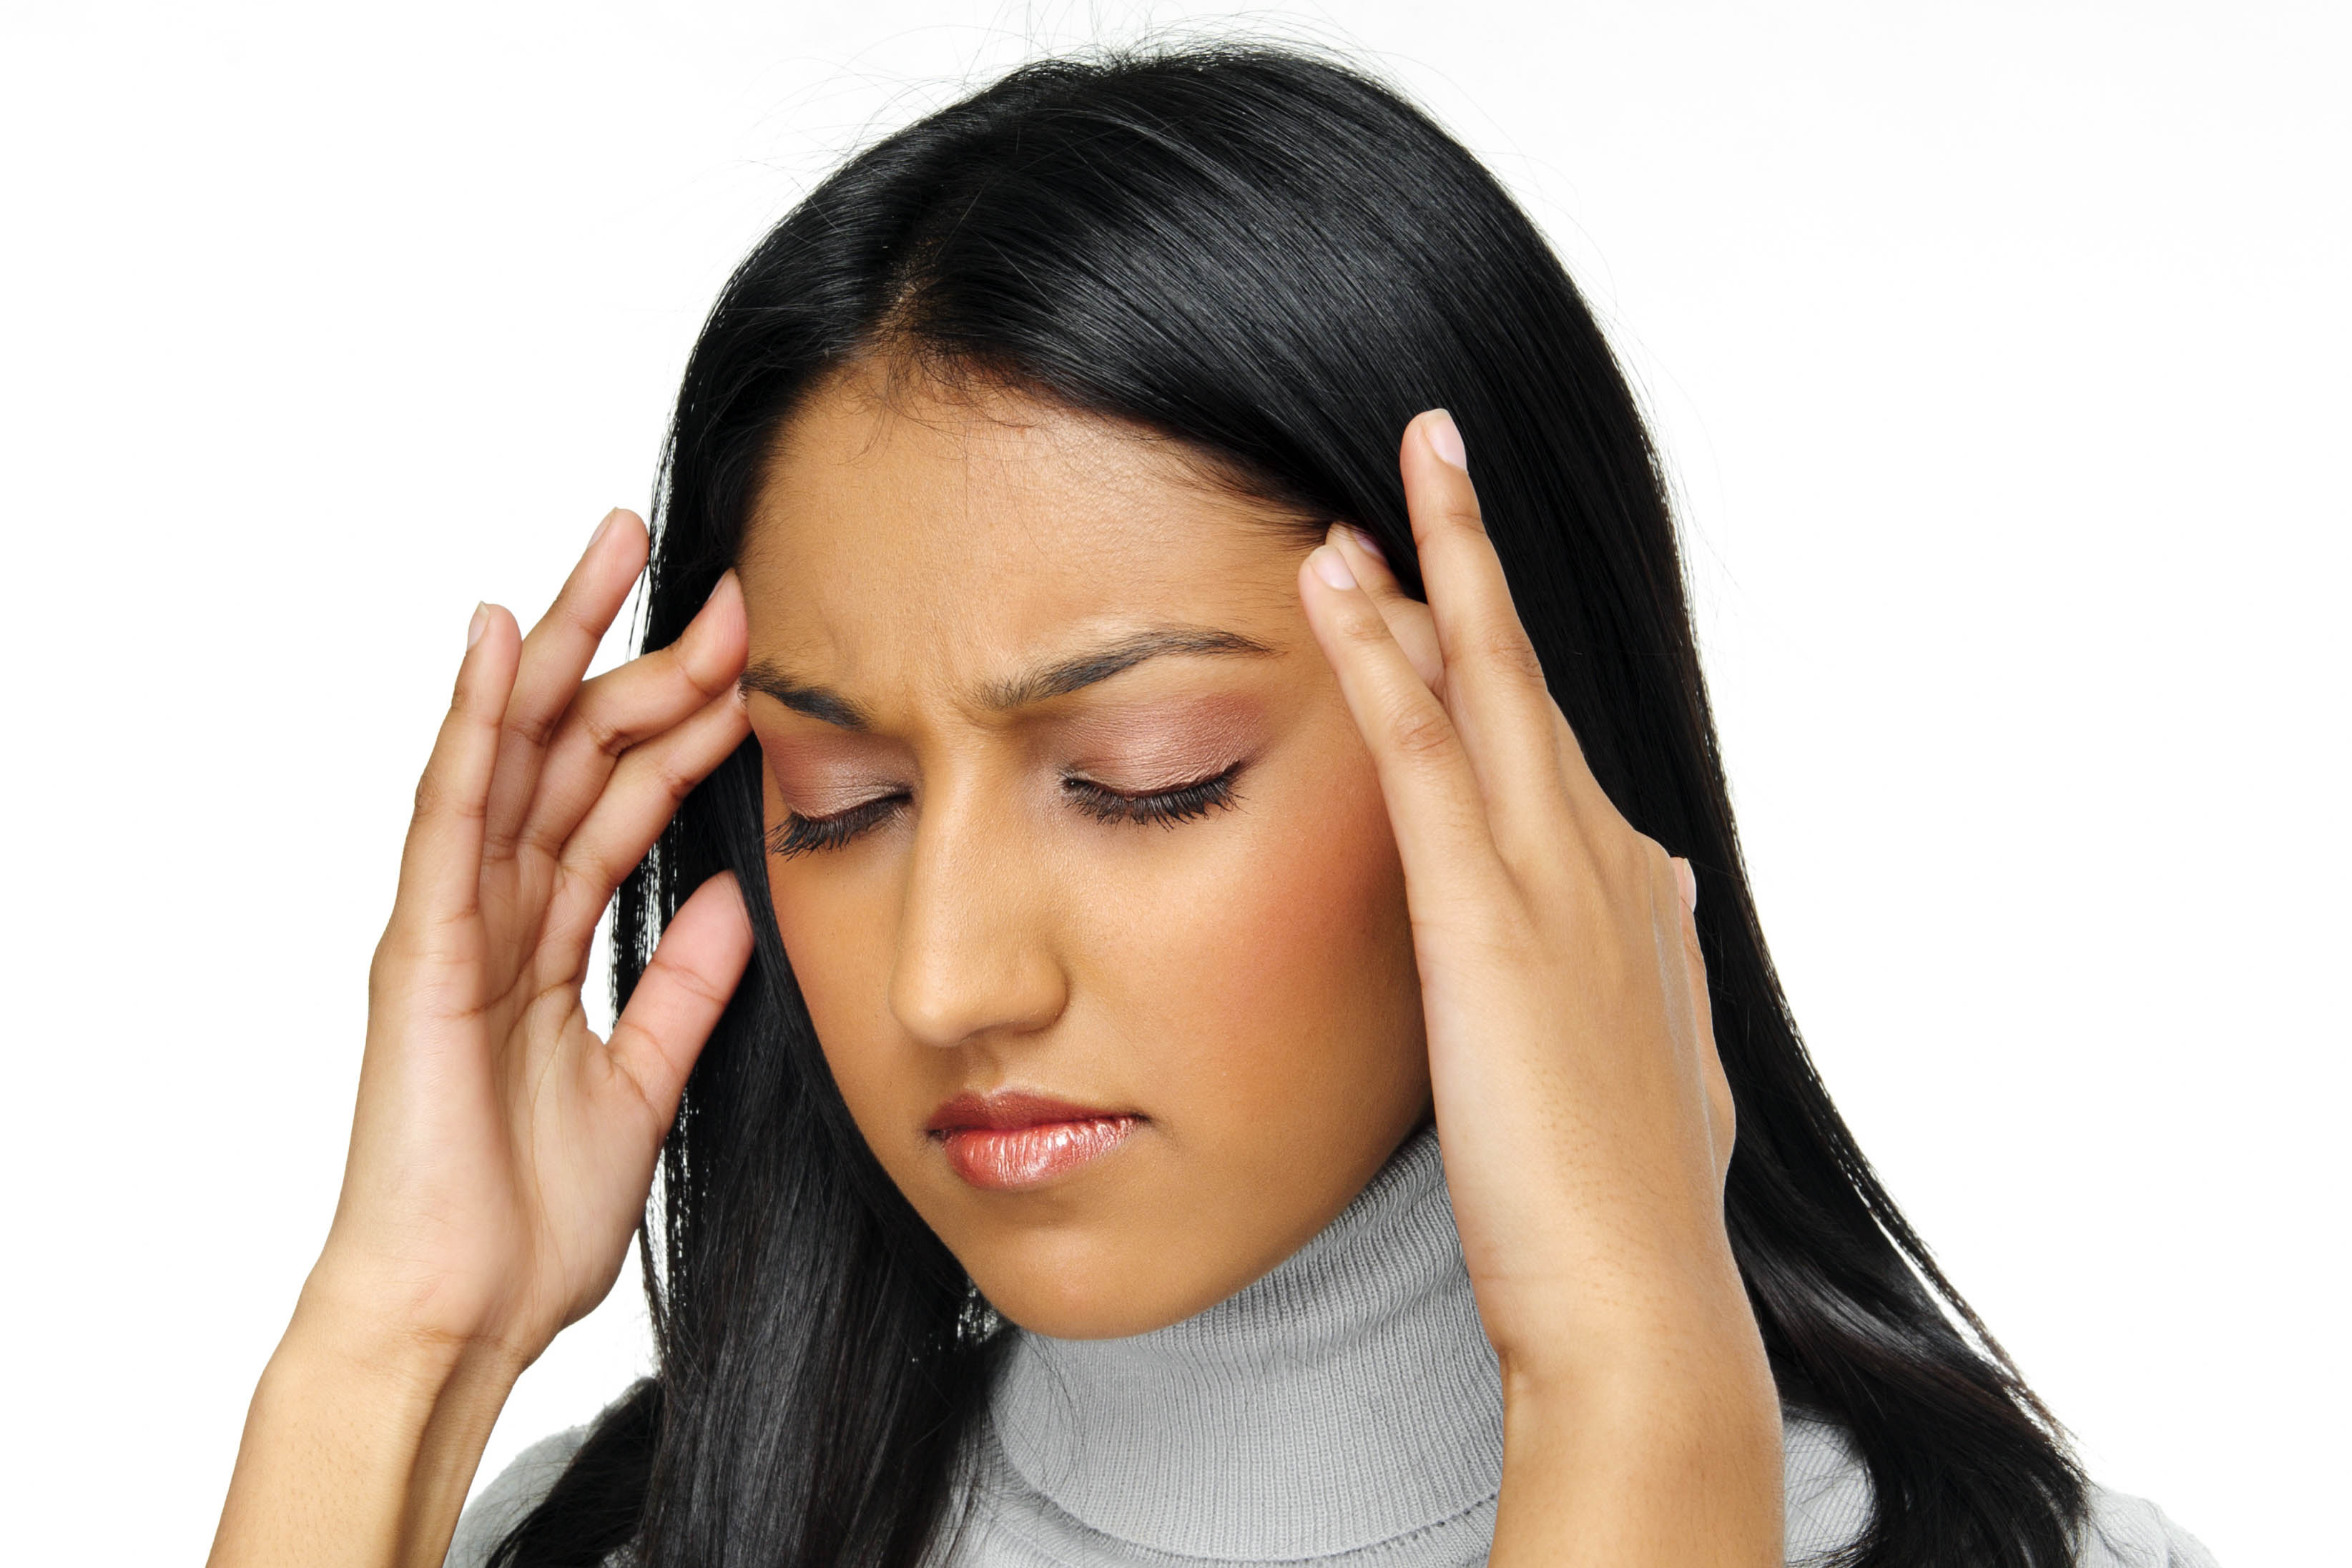 Indian beauty has a headache caused by stress